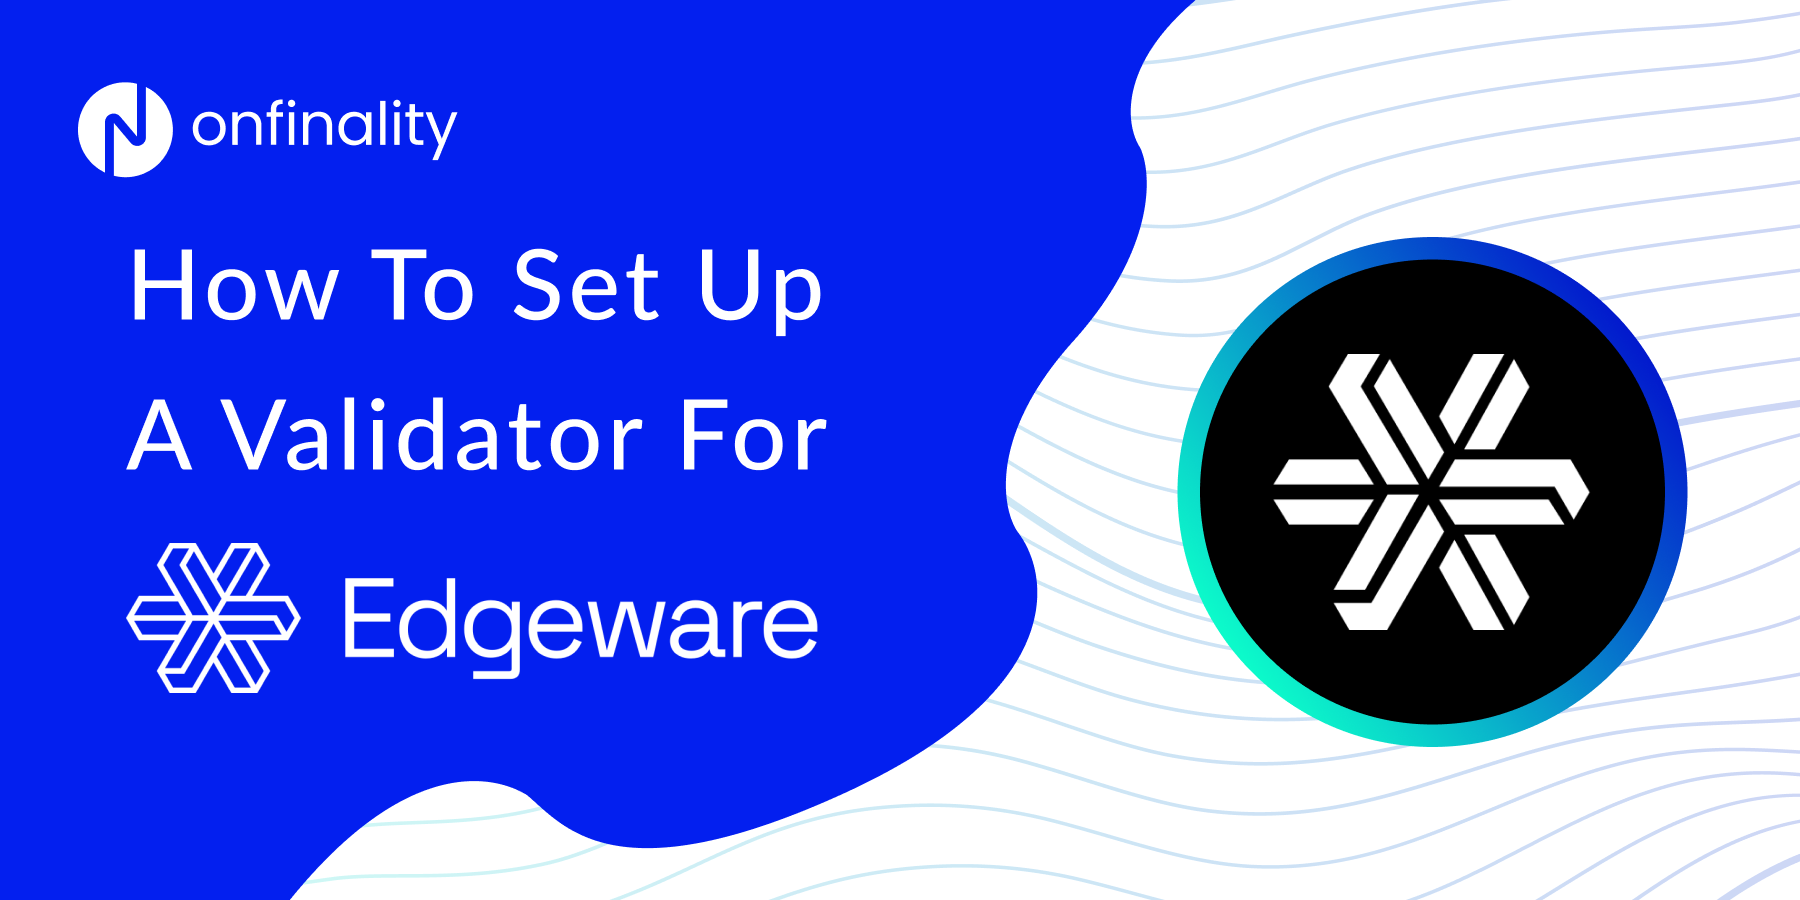 How To Set Up A Validator For Edgeware On OnFinality